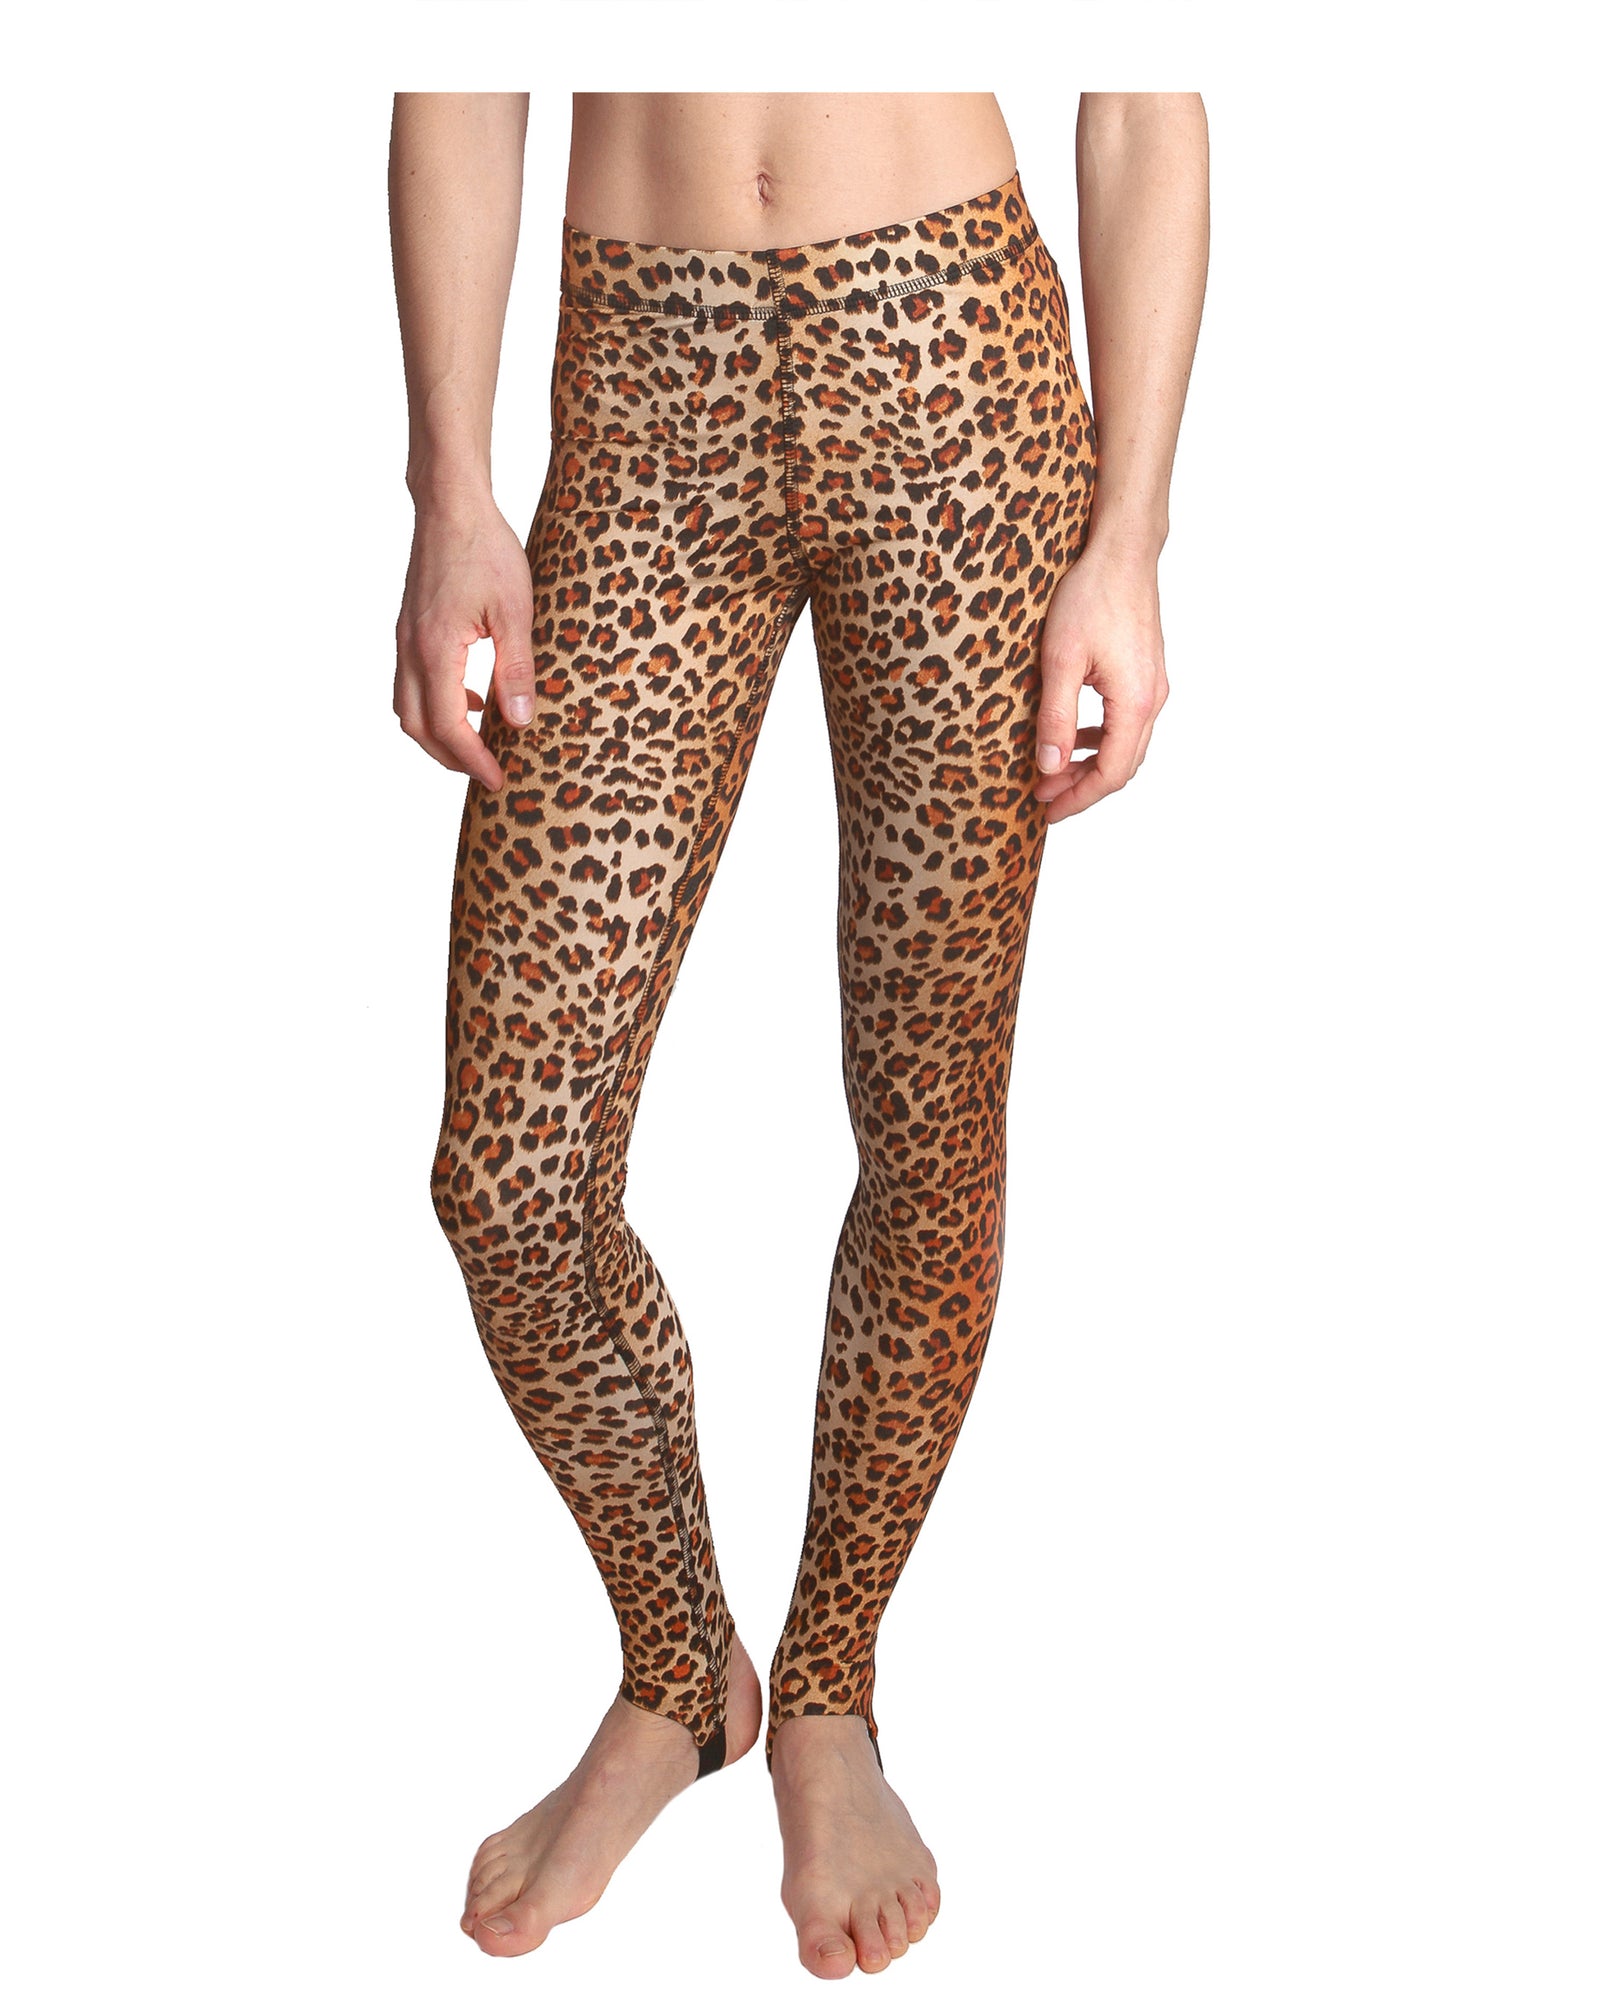 Leopard print gym leggings - Printed tights for workouts like yoga ...